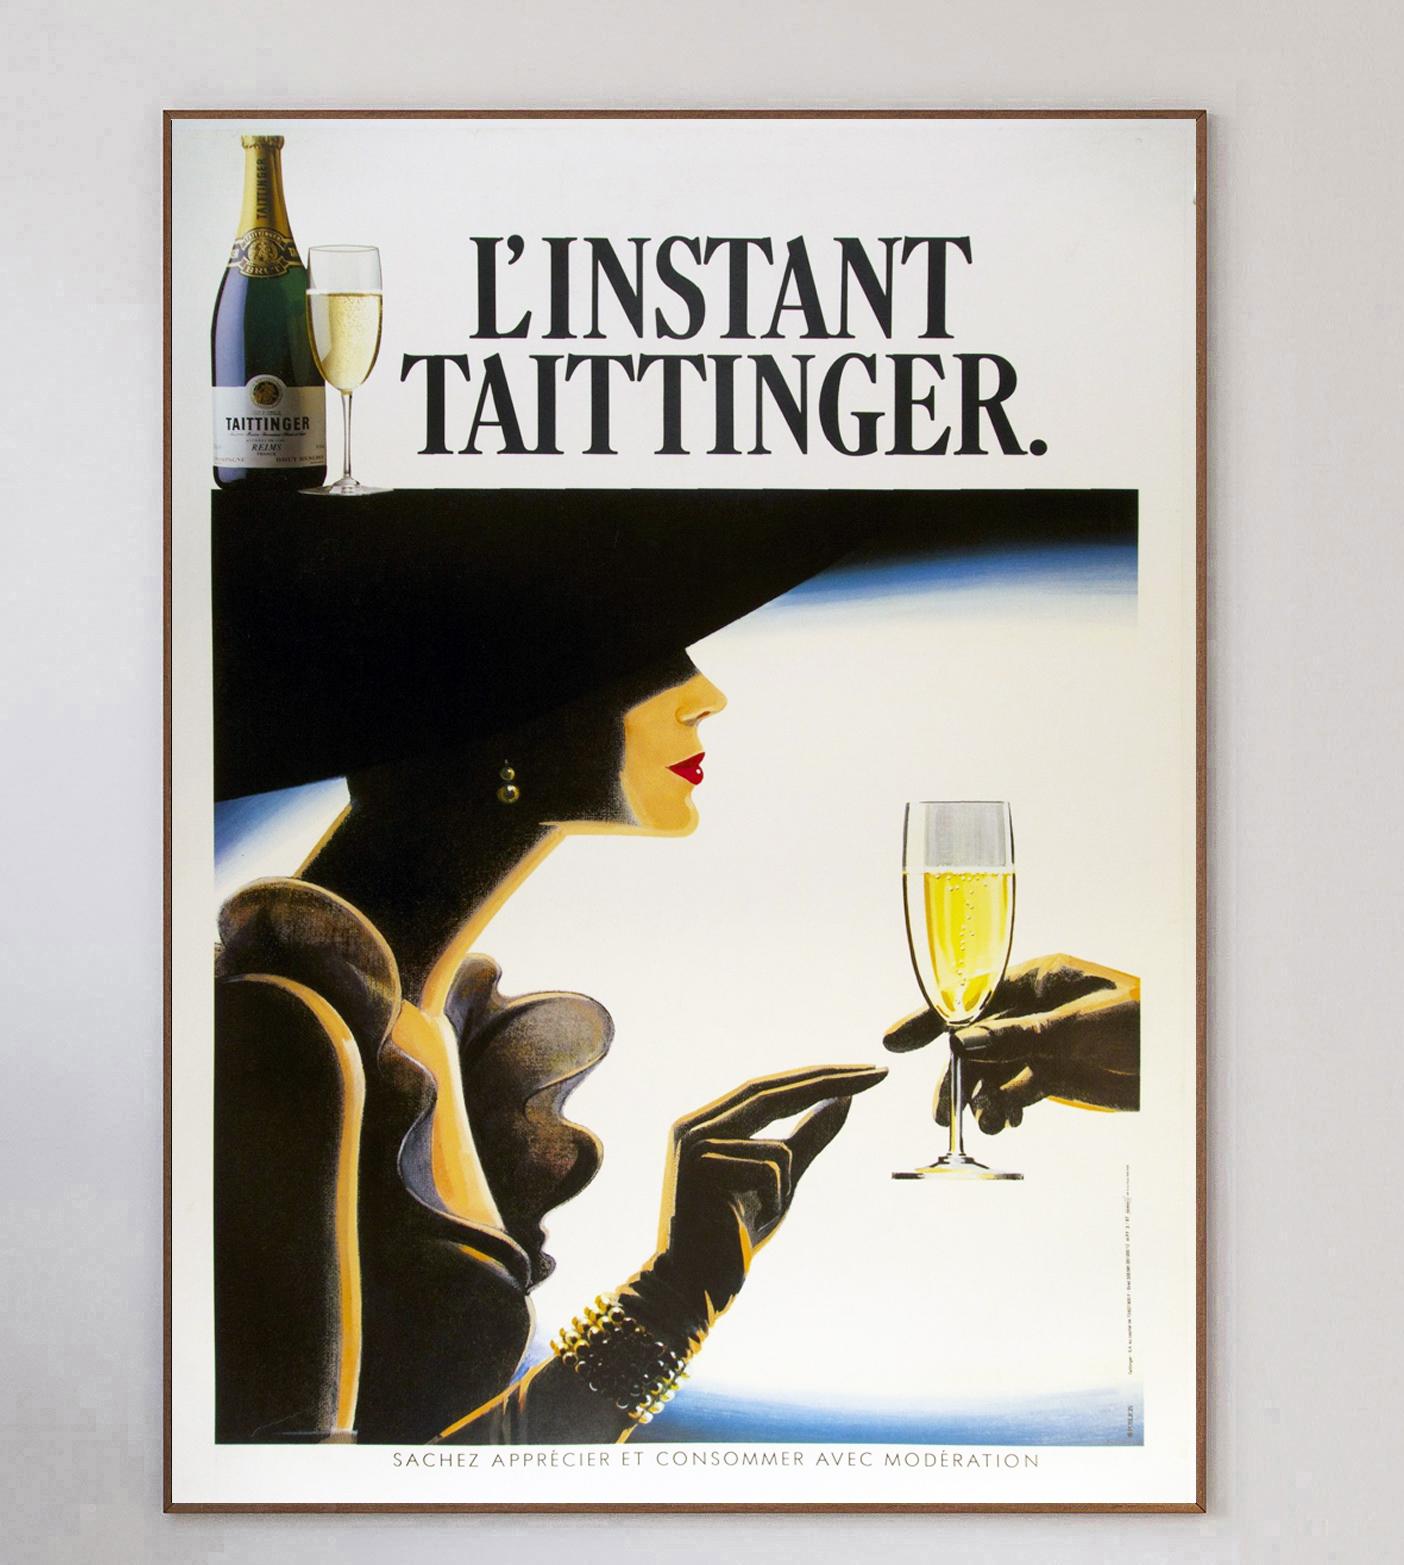 Founded in 1734, Taittinger have been producing champagne for nearly 300 years, and remains family owned and operated to this day. This gorgeous poster was created in 1980 and was part of the exceptionally successful 